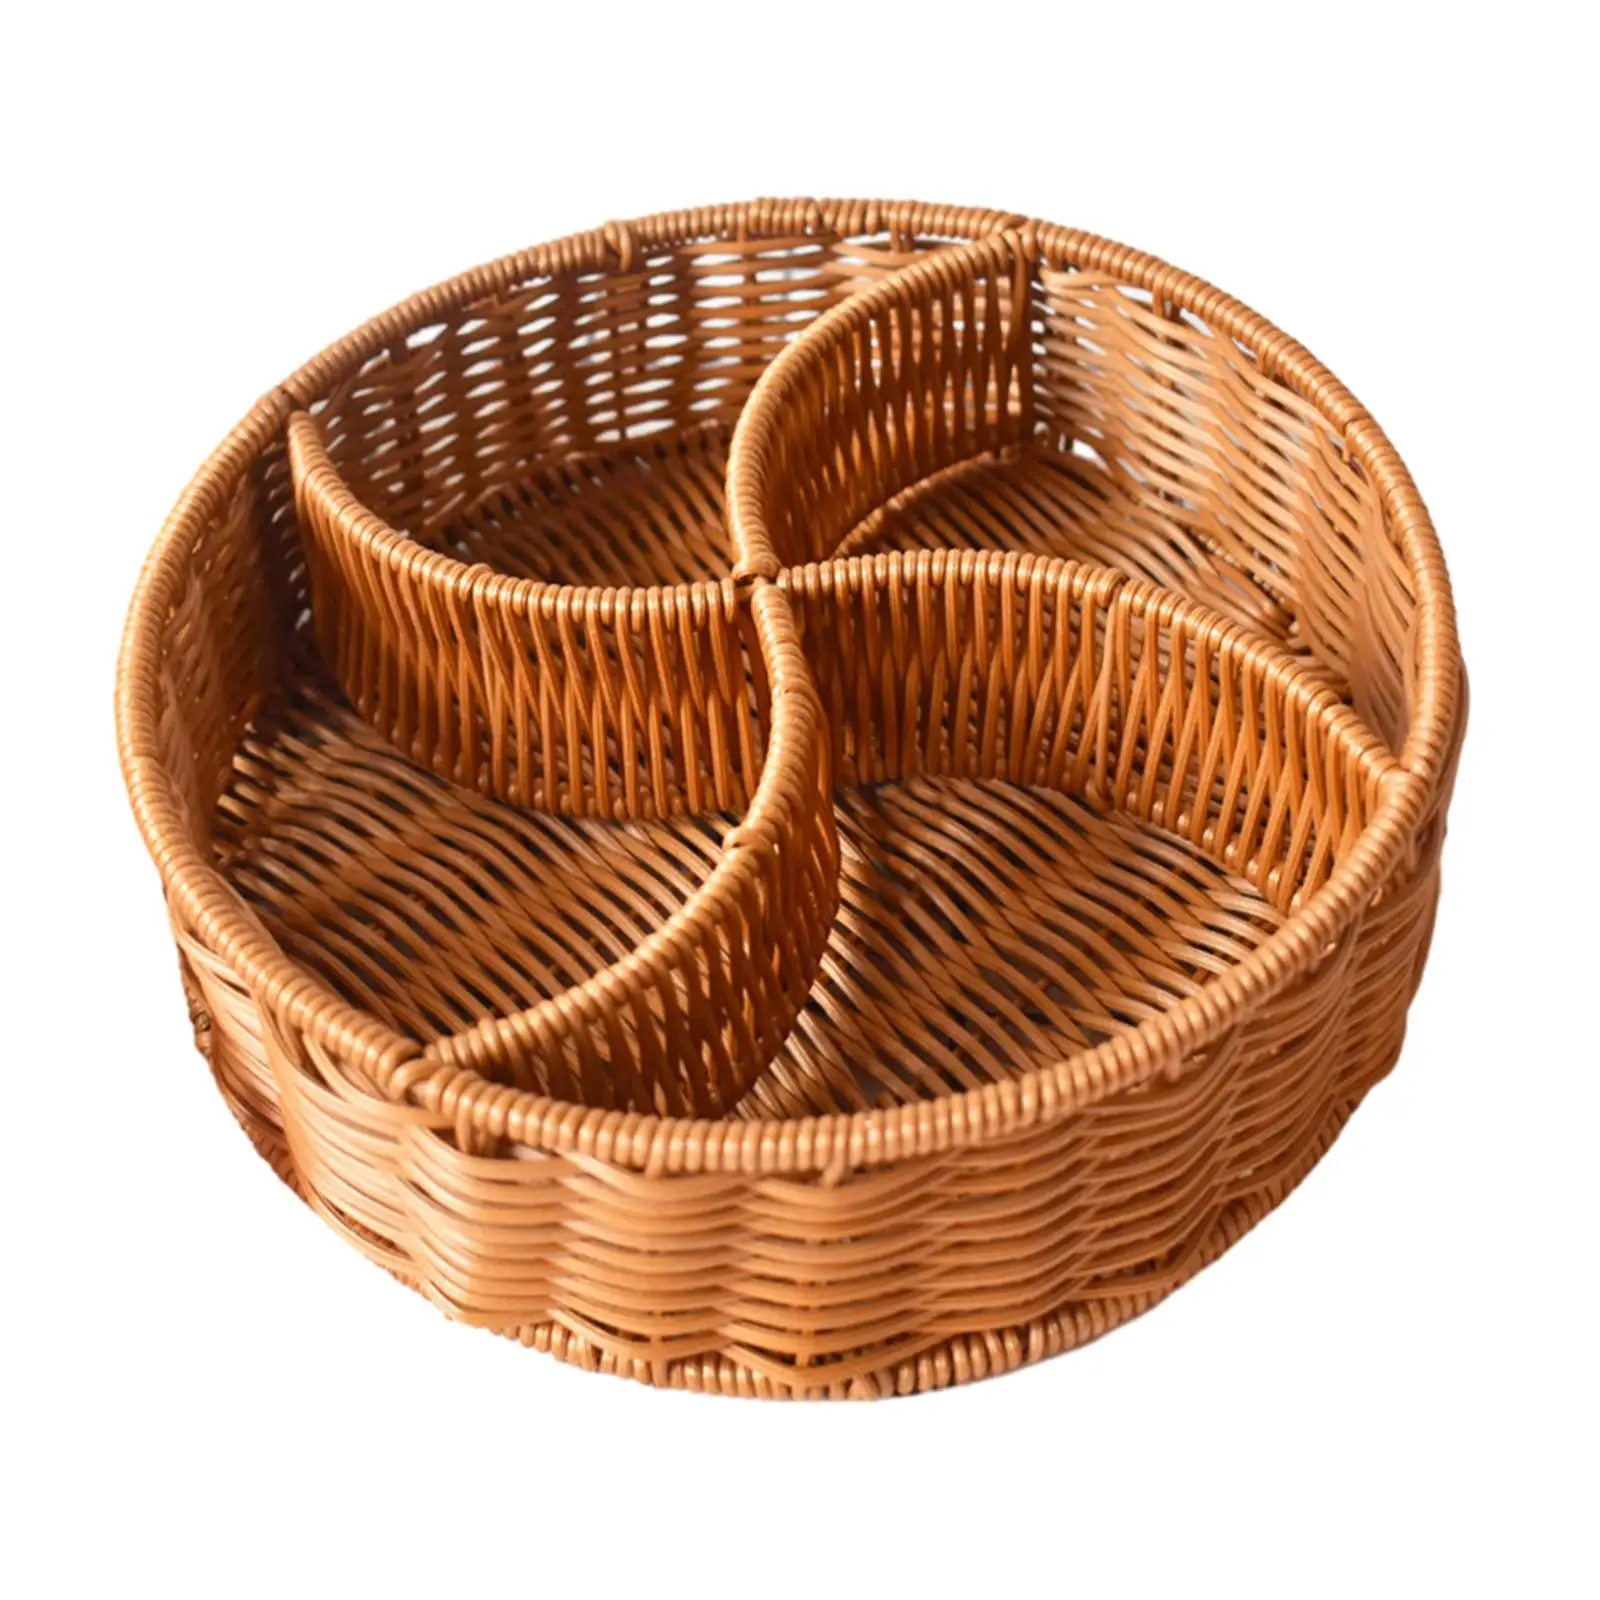 Hand Woven Serving Basket Candy Serving Tray Home Décor Kitchen Organizer Handmade for Kitchen Wedding Gift Dining Hotel